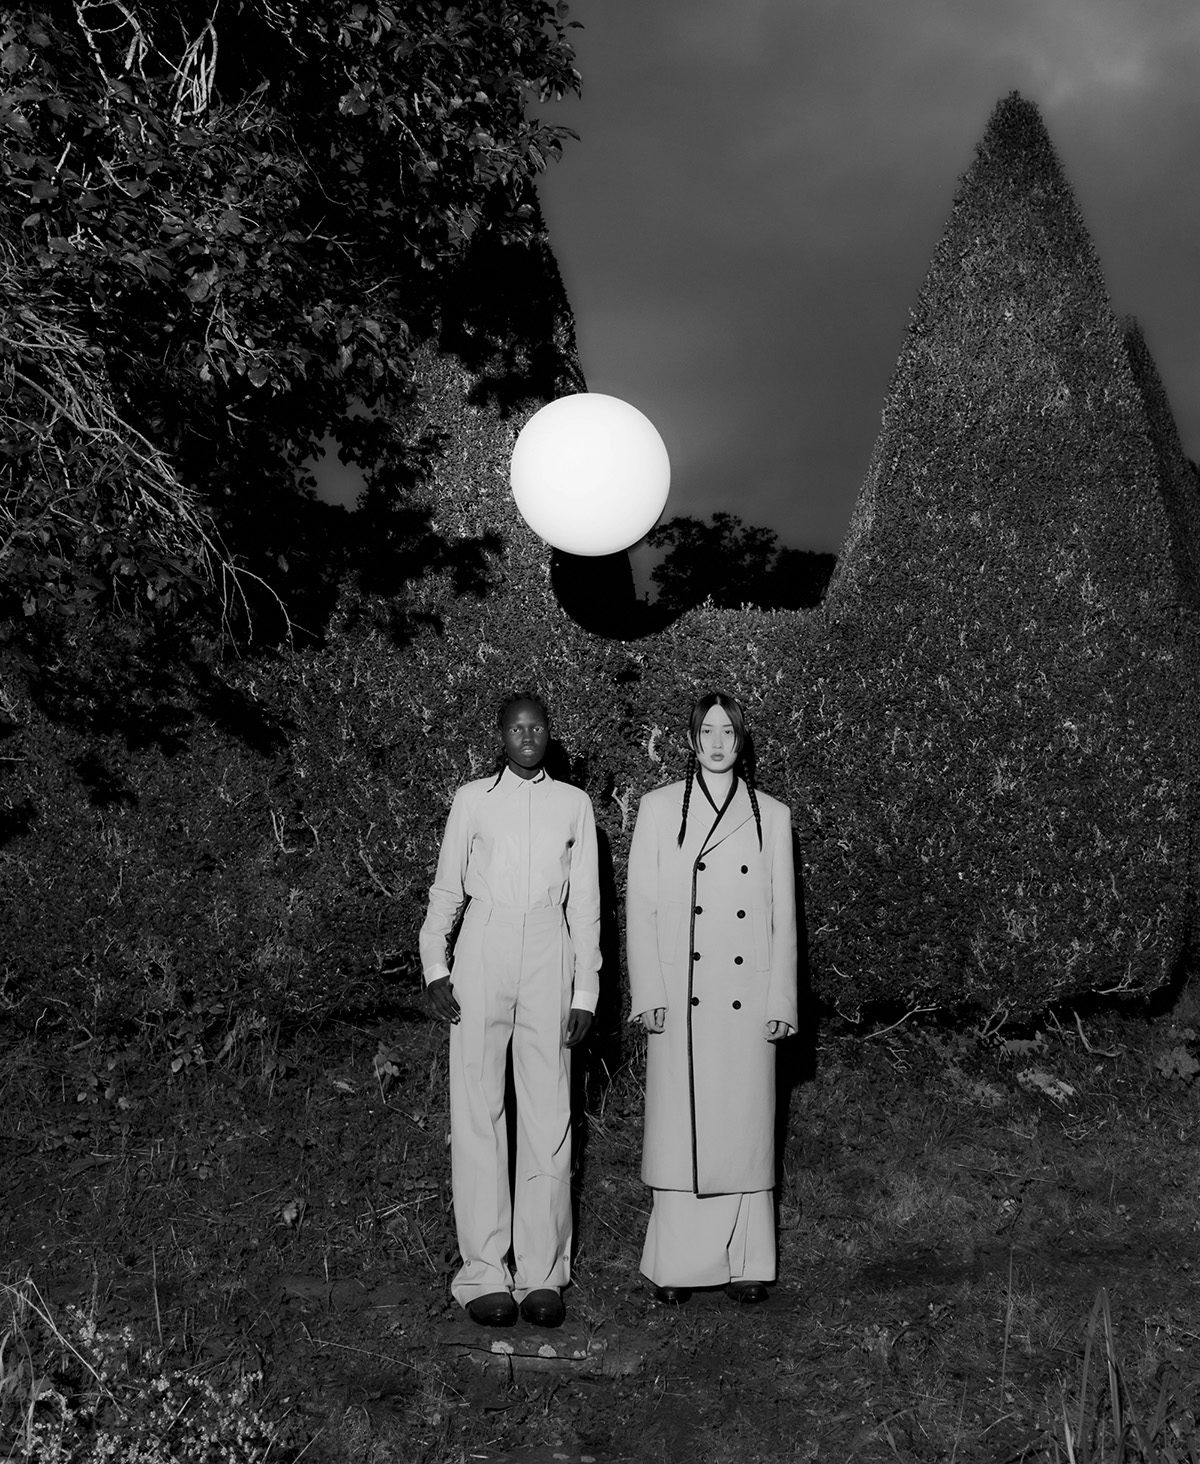 Black and white image by Agnes Lloyd-Platt shows two people in light-coloured suits stood side by side against a hedgerow, with a moon-shaped ball floating overhead